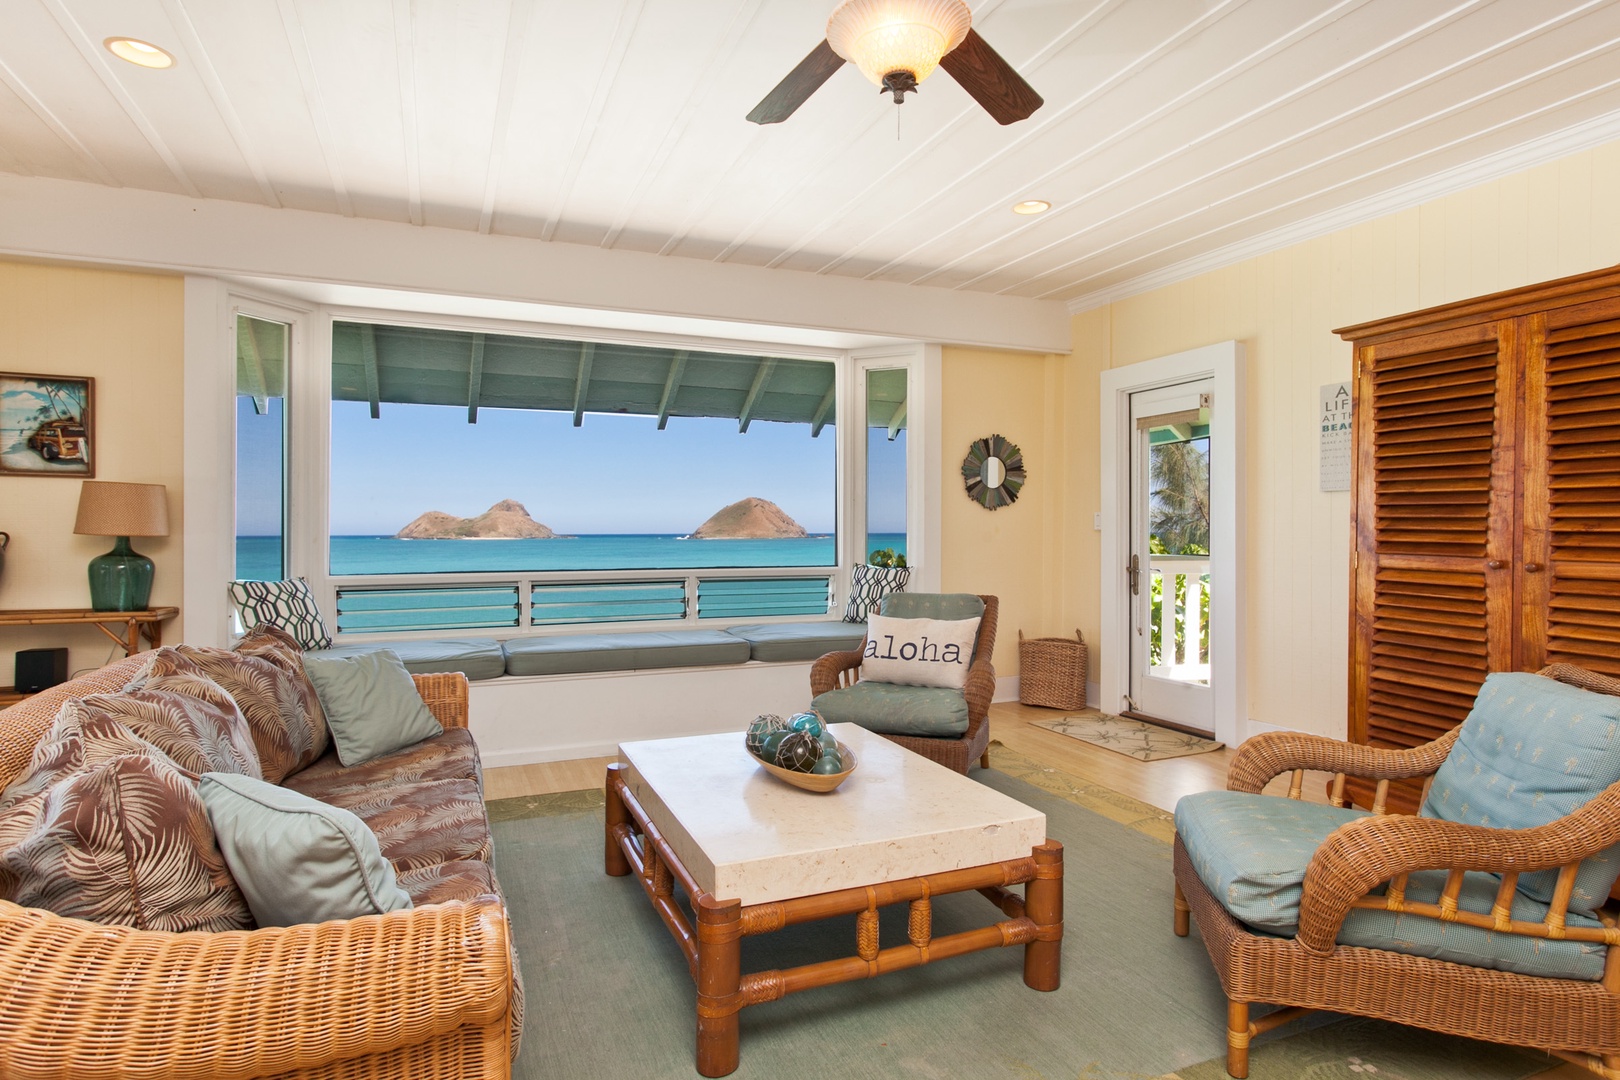 Kailua Vacation Rentals, Hale Kainalu* - Take in the ocean views from this comfortable living space.